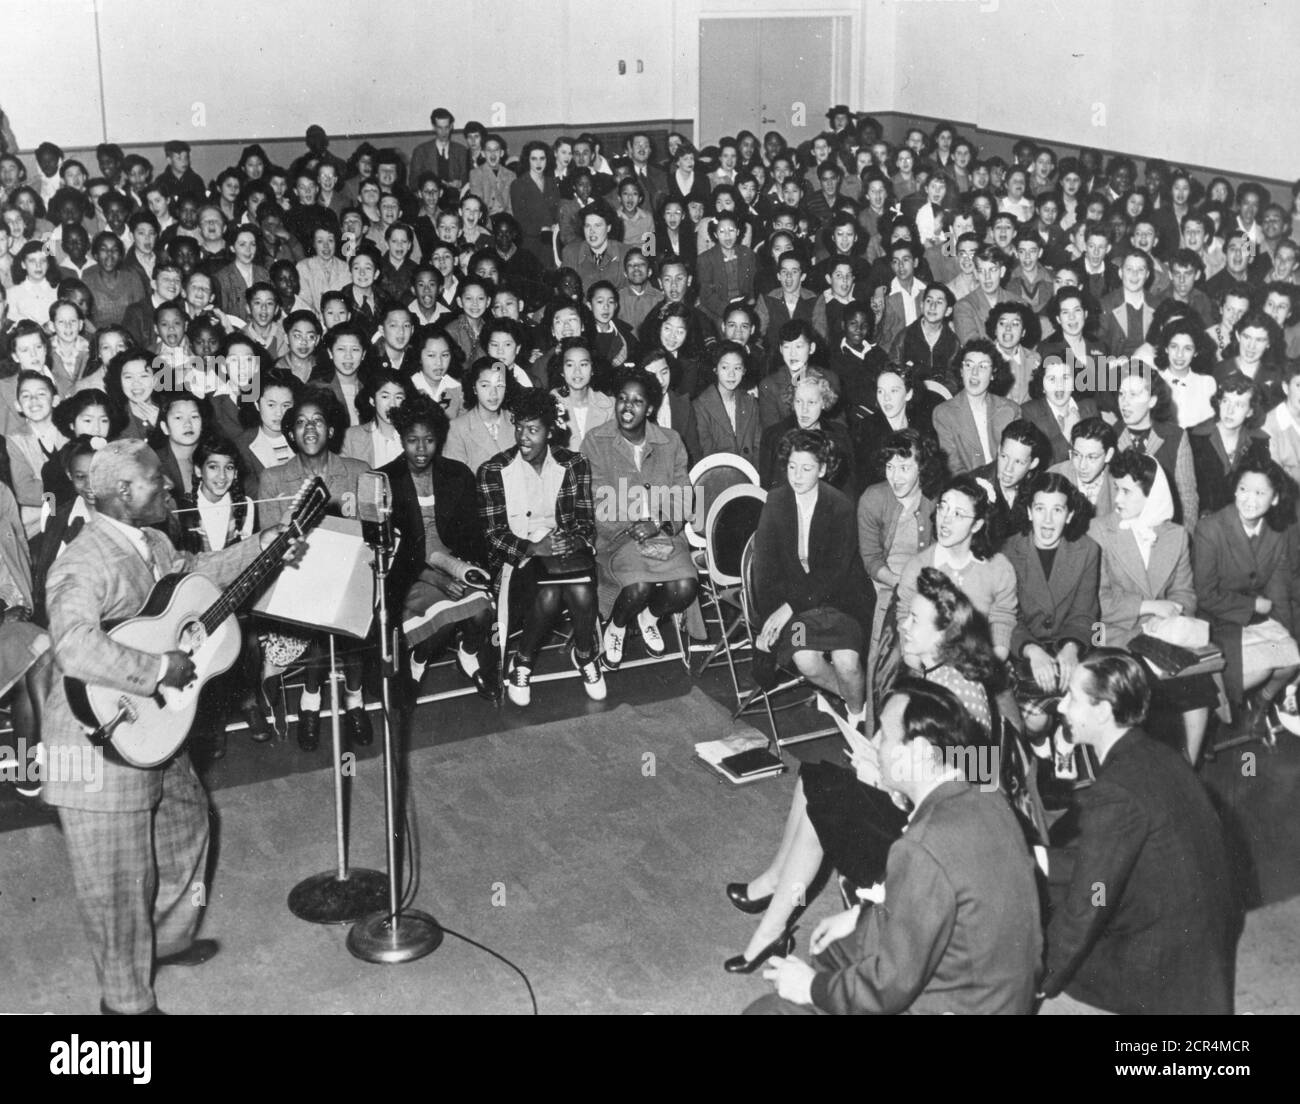 Huddie William Ledbetter (1888-1949), a folk and blues musician better known by his stage name 'Leadbelly,' performs before an audience of high school-age youth, accompanying himself on his 12-string guitar, San Francisco, CA, 1949. (Photo by RBM Vintage Images) Stock Photo